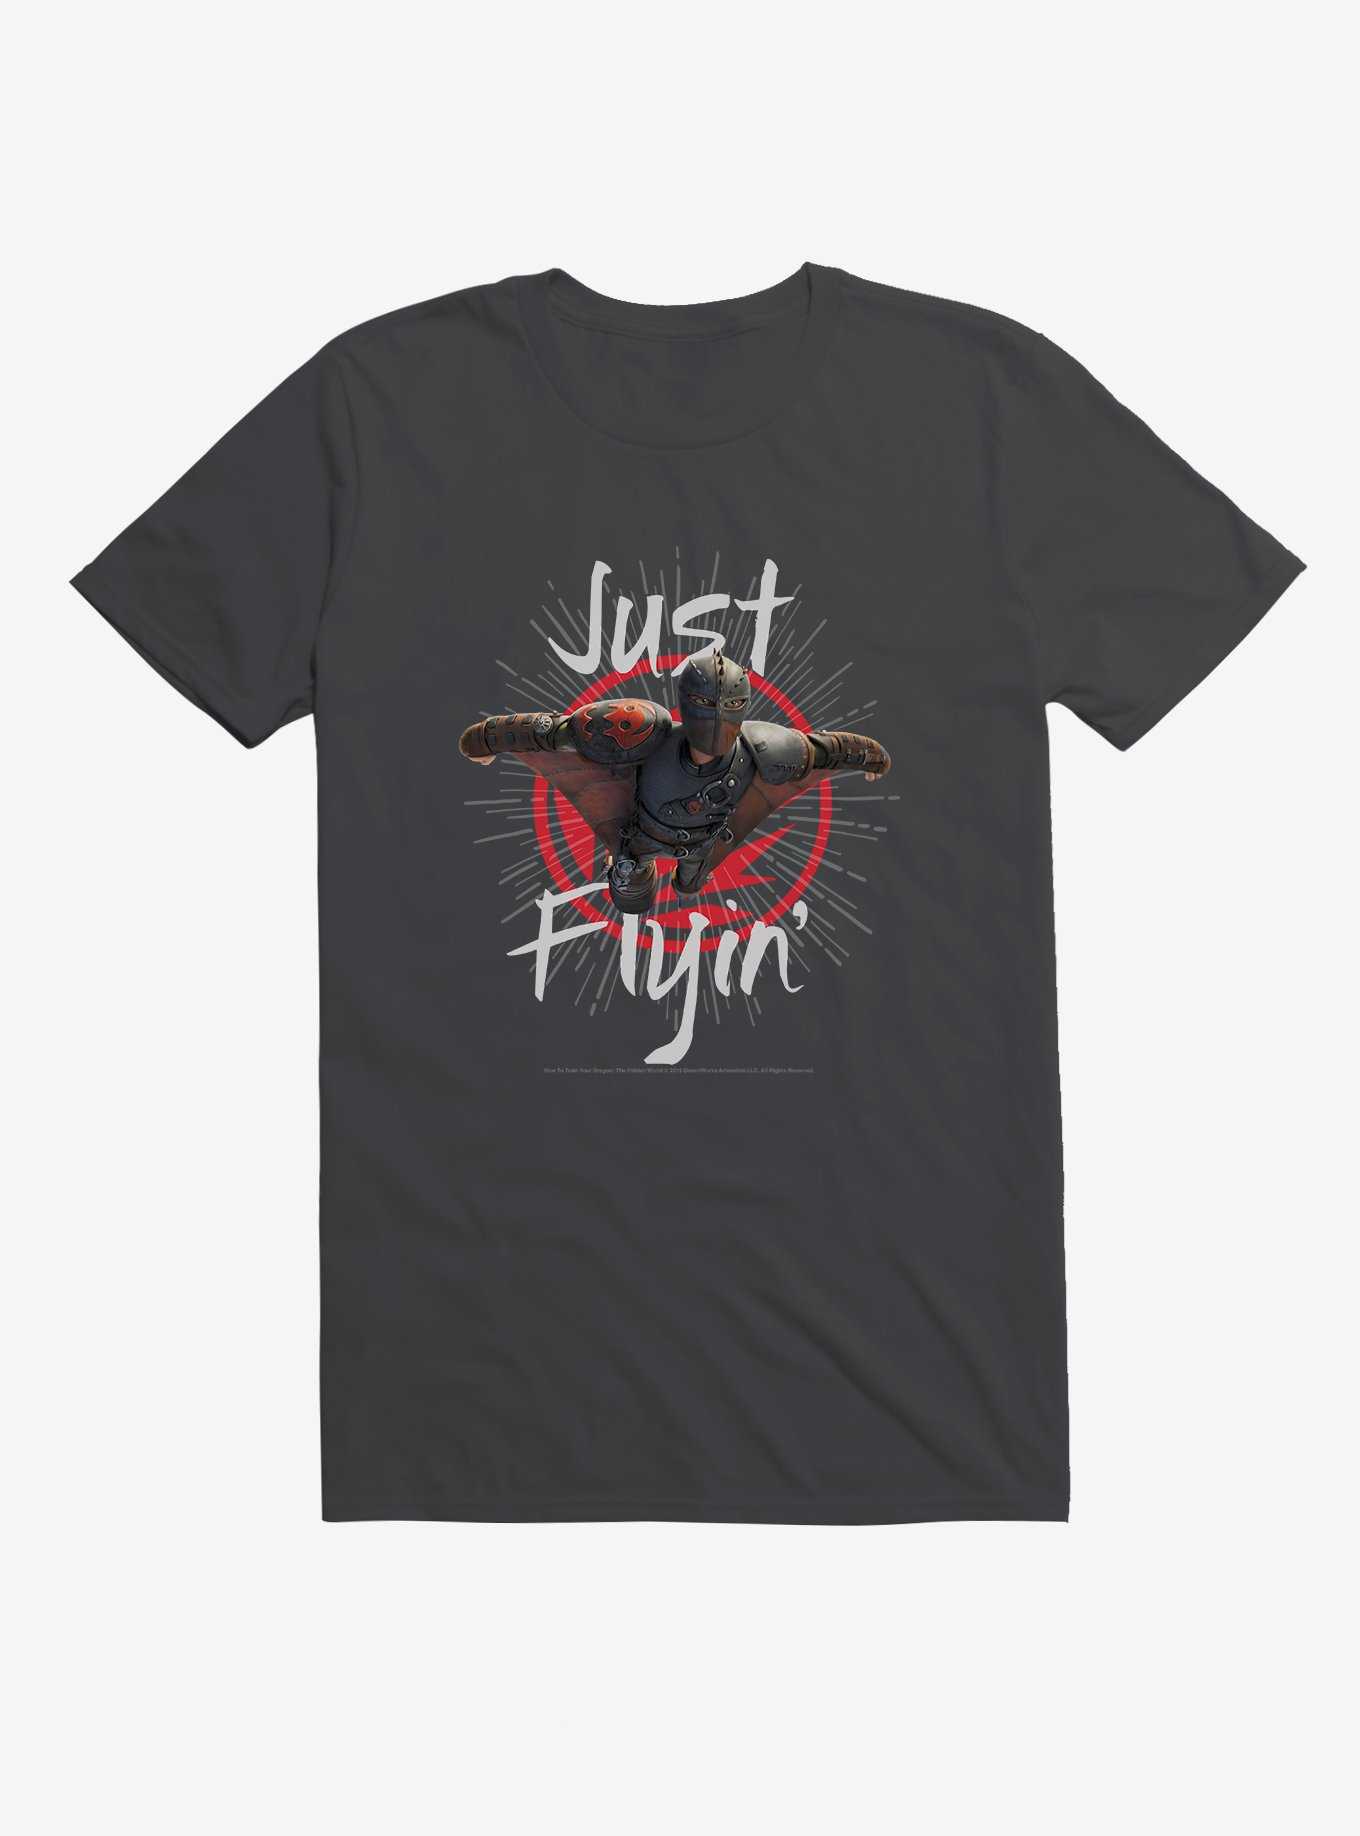 How To Train Your Dragon Just Flyin' T-Shirt, , hi-res